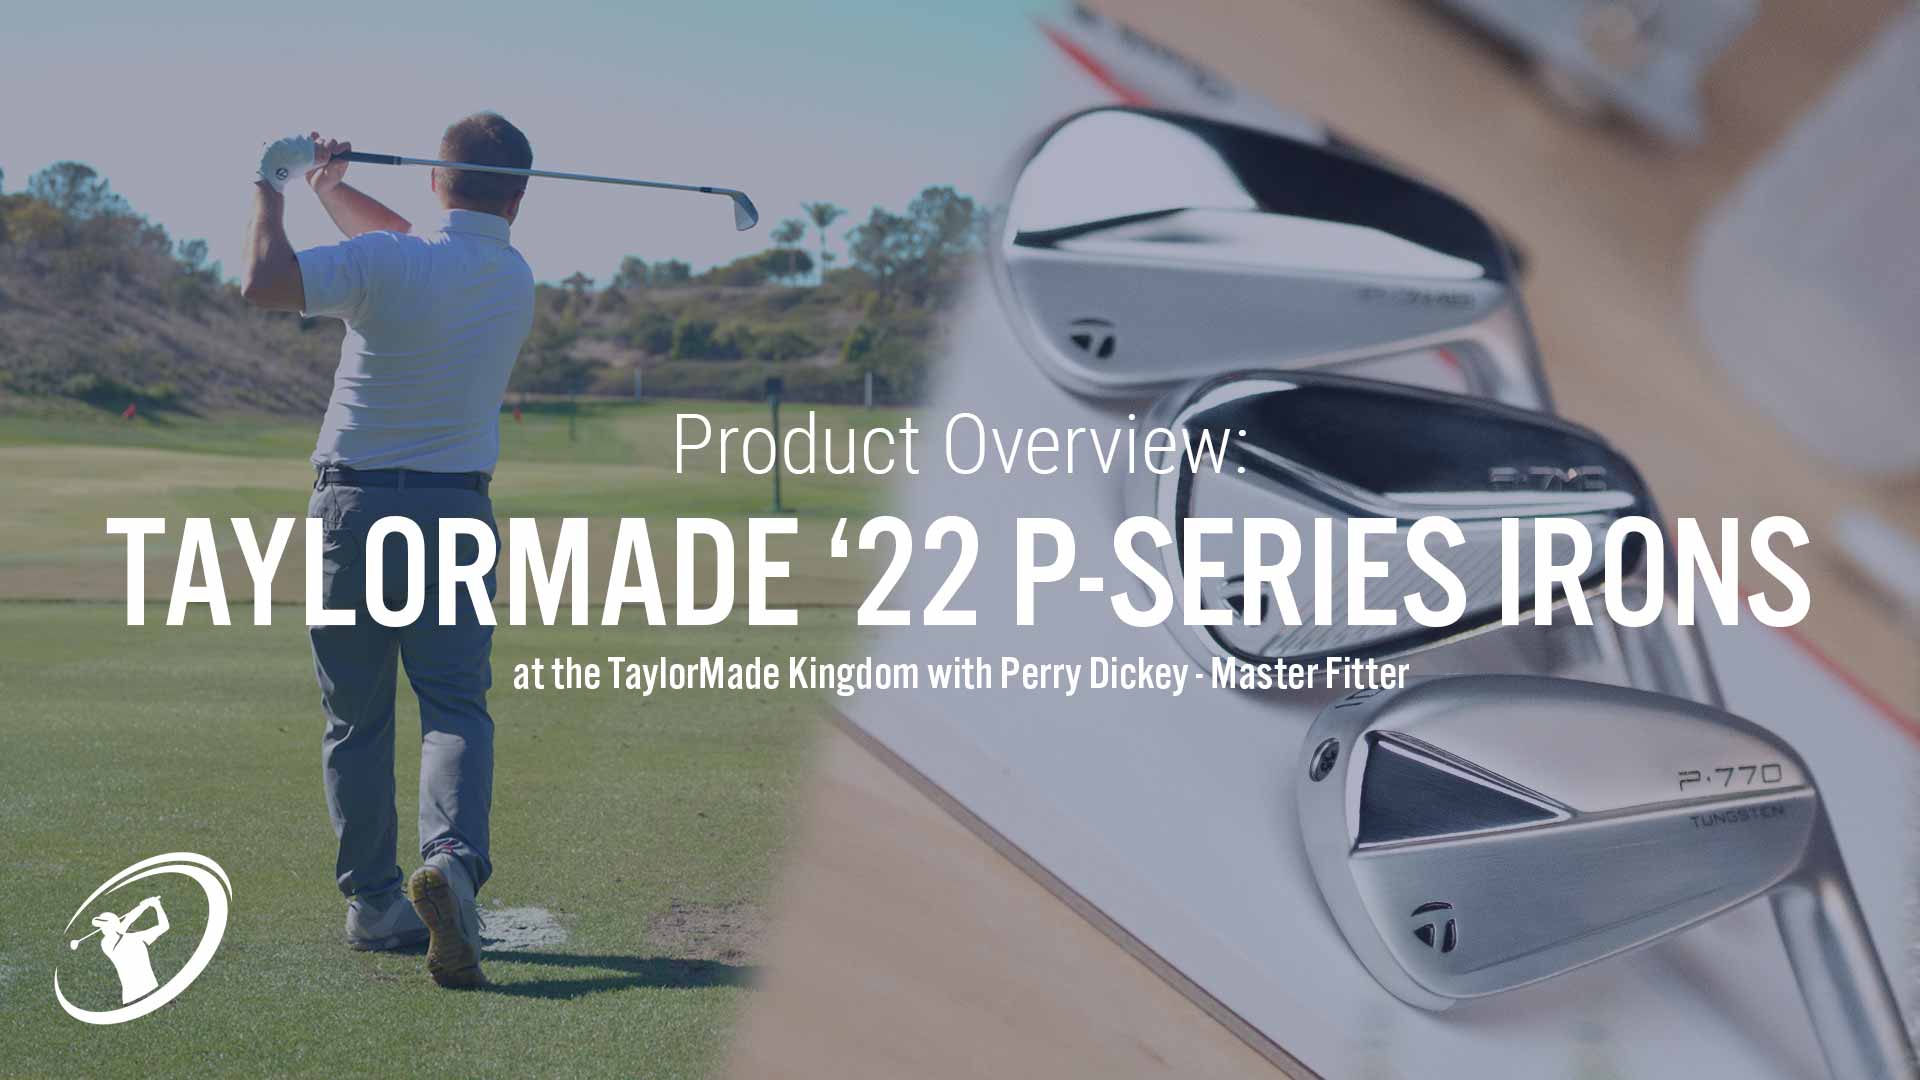 NEW TaylorMade PSERIES IRONS overview at the TaylorMade Kingdom